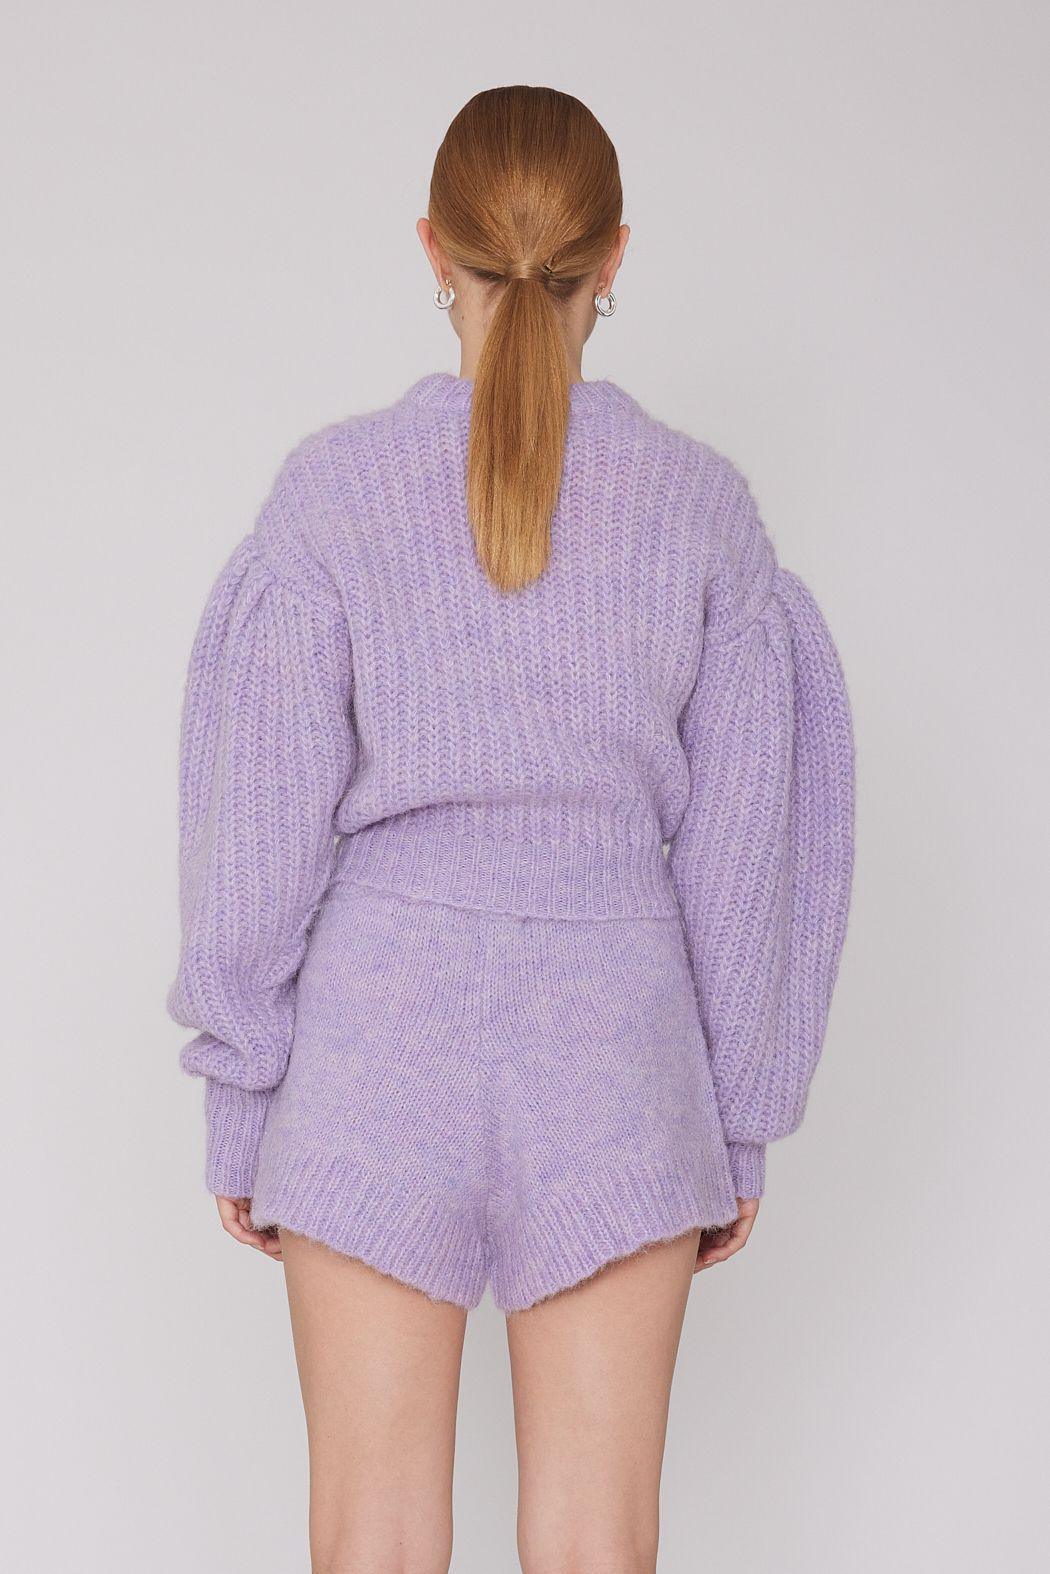 Rotate Remain - Adley Lilac Cropped Logo Knit - 32 The Guild 